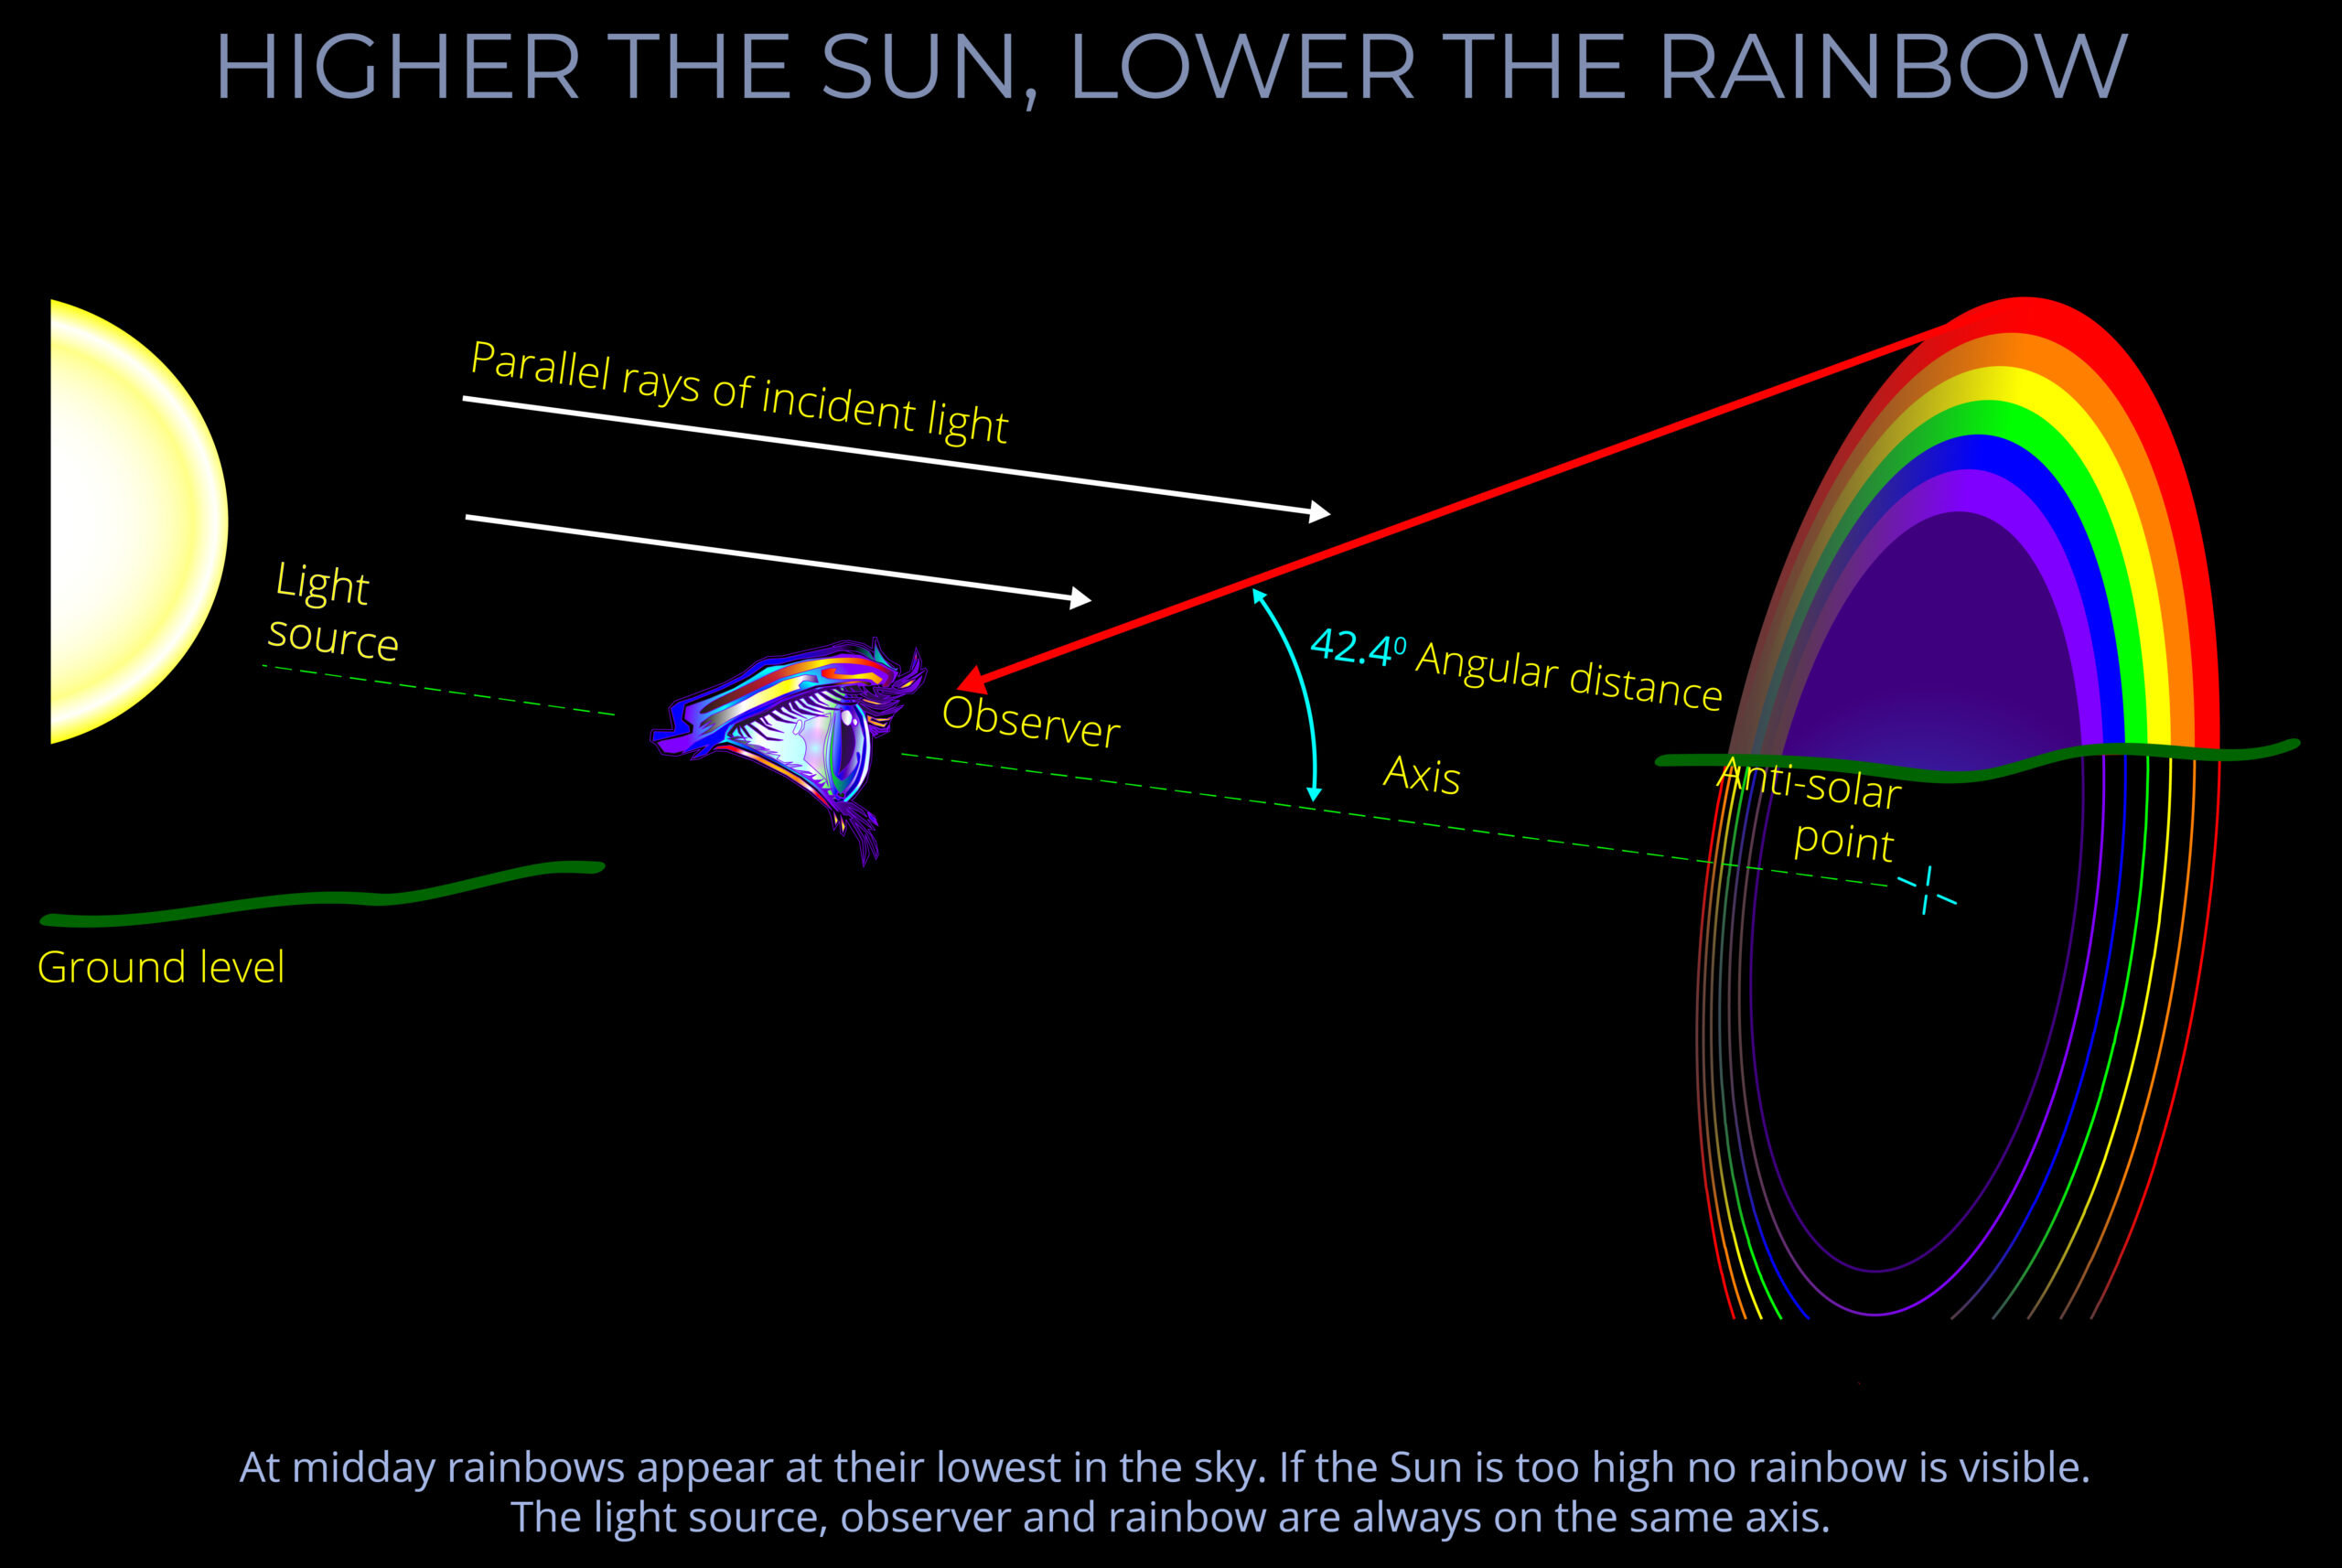 How are rainbows formed from sunlight and water?